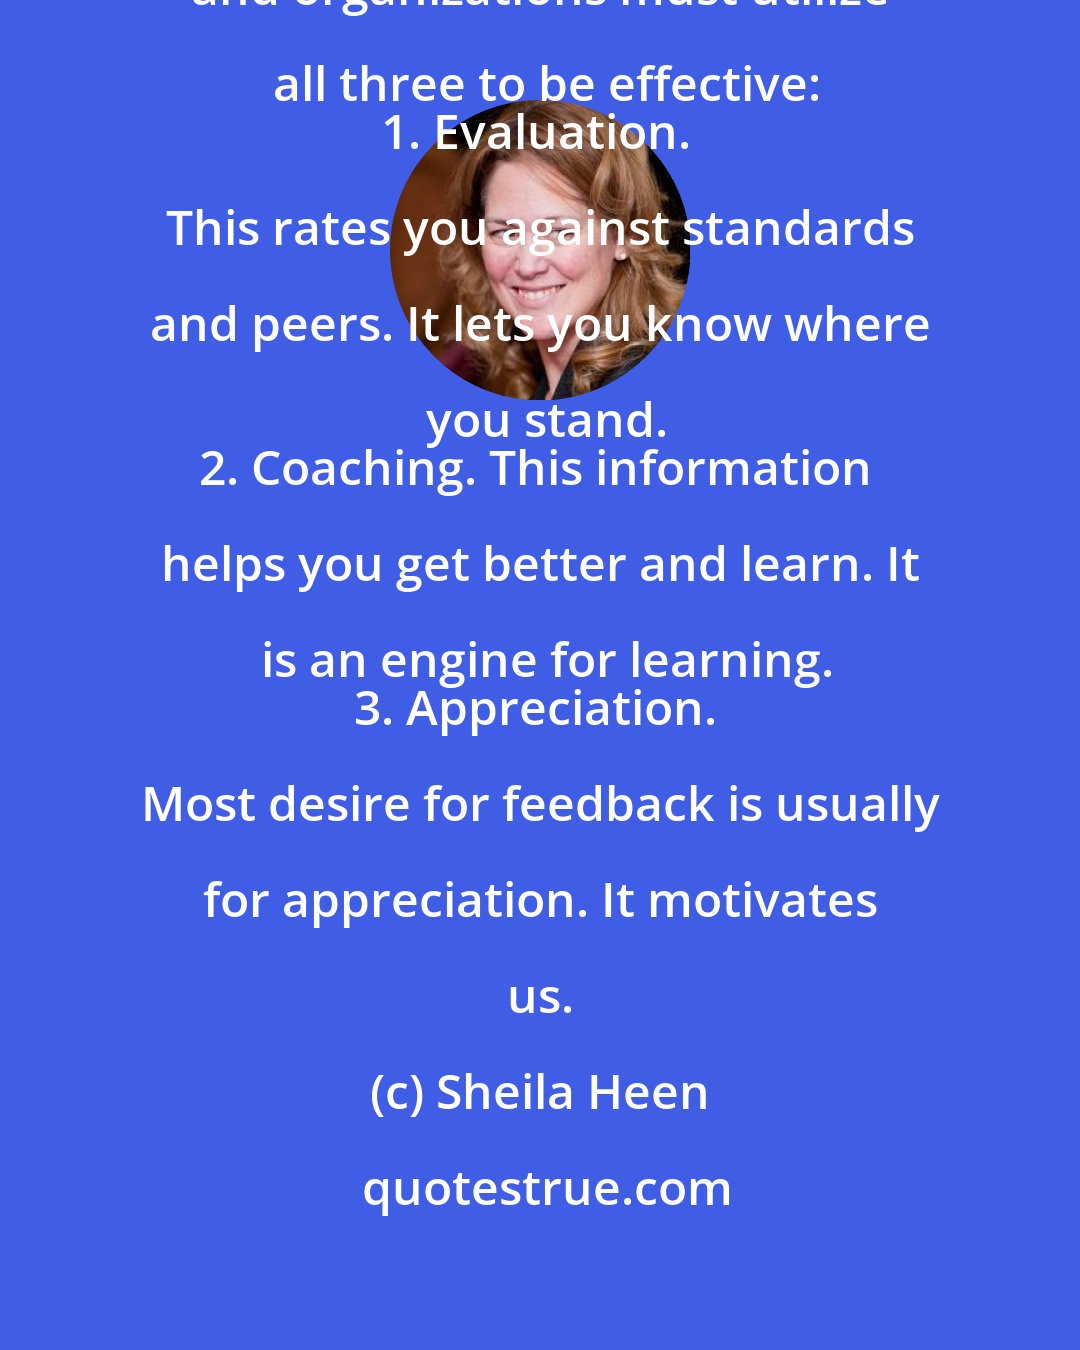 Sheila Heen: There are three kinds of feedback and organizations must utilize all three to be effective:
1. Evaluation. This rates you against standards and peers. It lets you know where you stand.
2. Coaching. This information helps you get better and learn. It is an engine for learning.
3. Appreciation. Most desire for feedback is usually for appreciation. It motivates us.